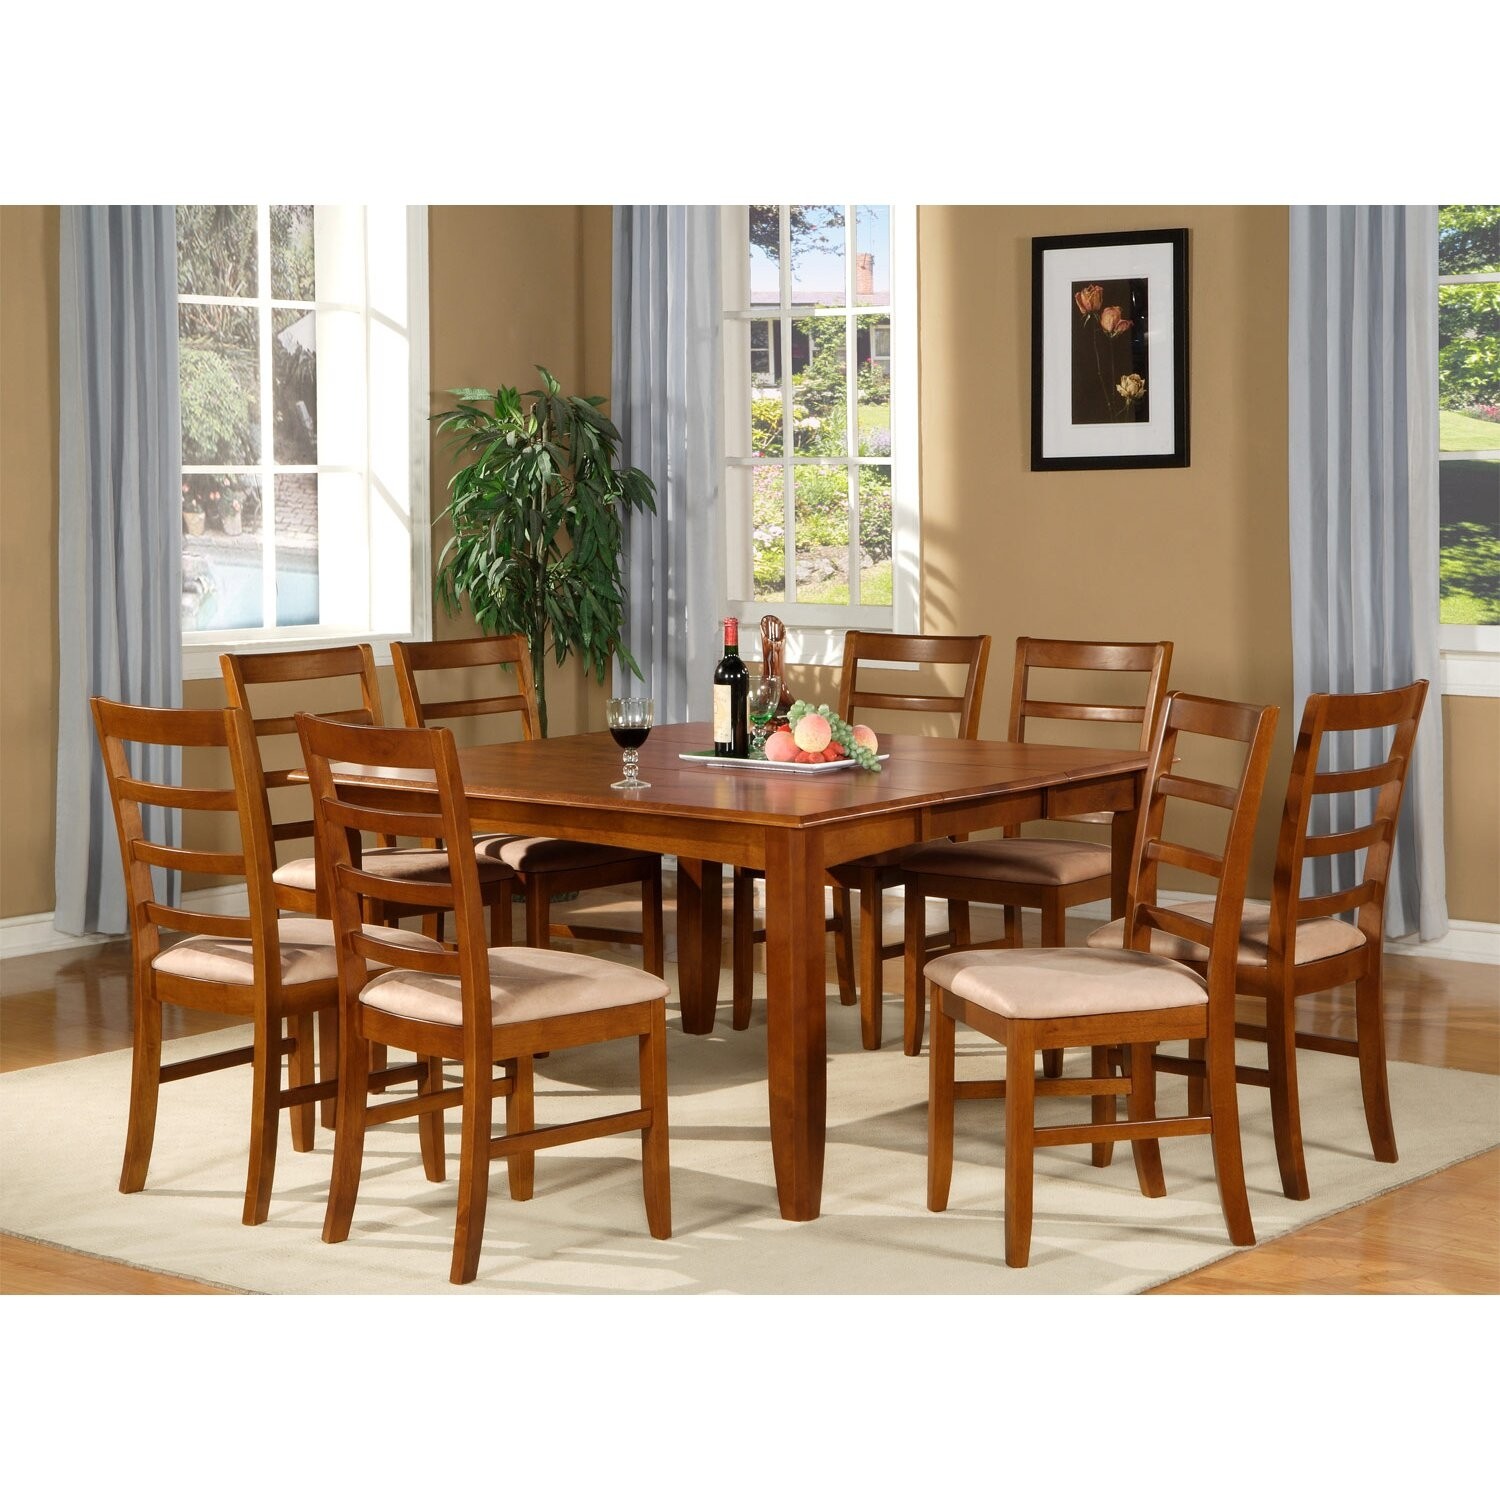 East West Furniture PARF9-SBR-C 9-Piece Parfait Square Table with 18 in. Butterfly Leaf & 8 Microfiber upholstered Seat Chairs in Saddle Brown Finish